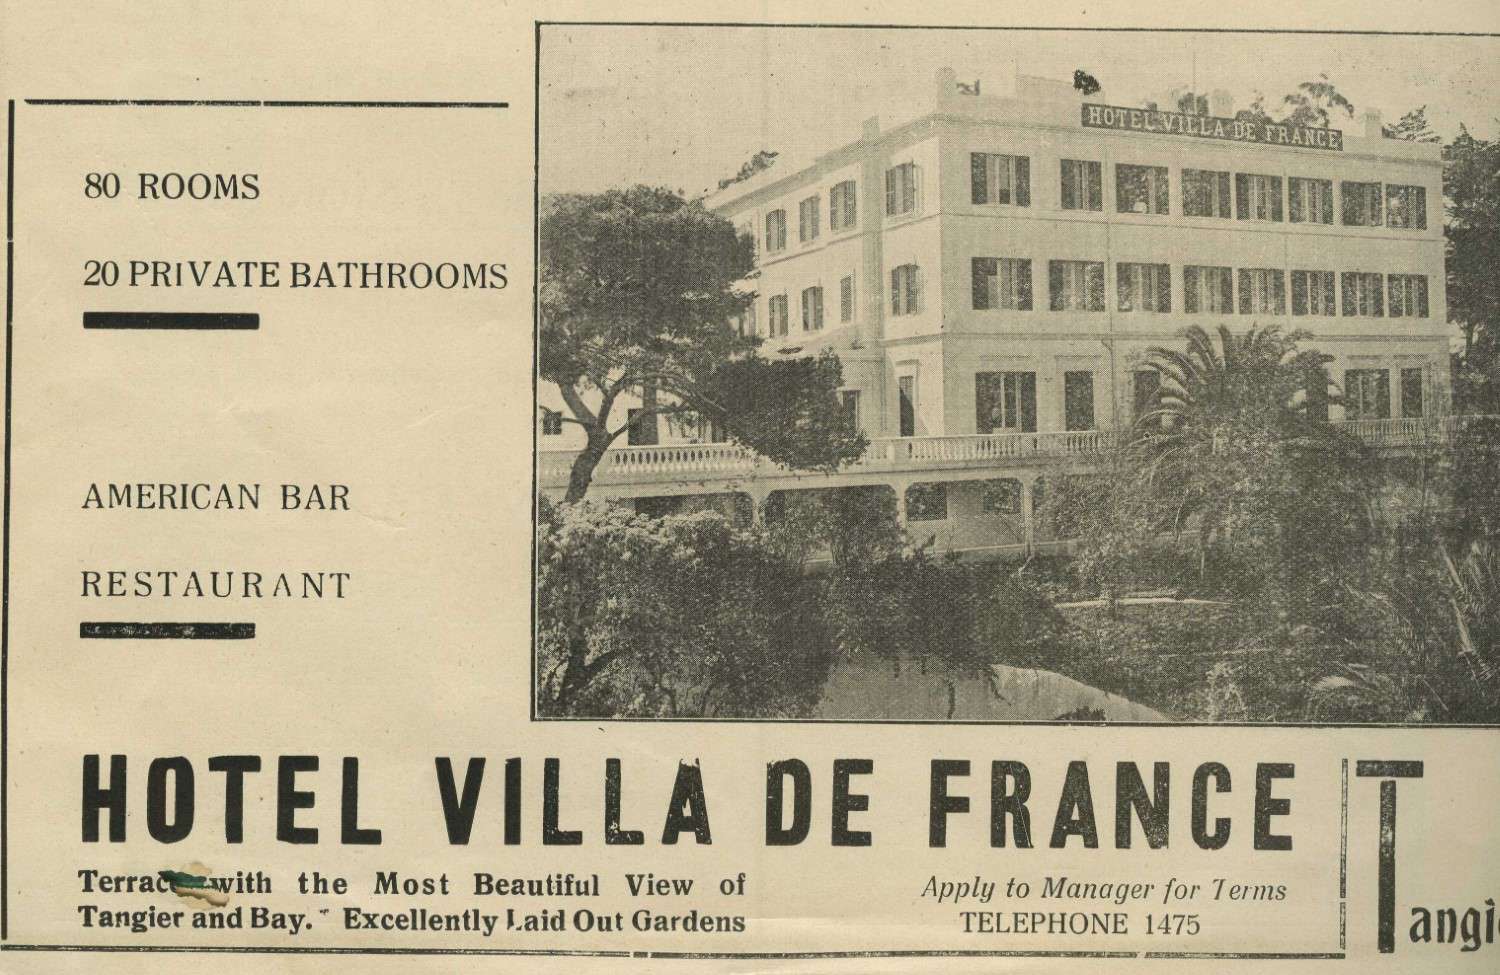 Grand Hotel Villa de France - Newspaper ad. Hotel Villa de France in Tangier, View of garden and facade with trees and palms, terrace